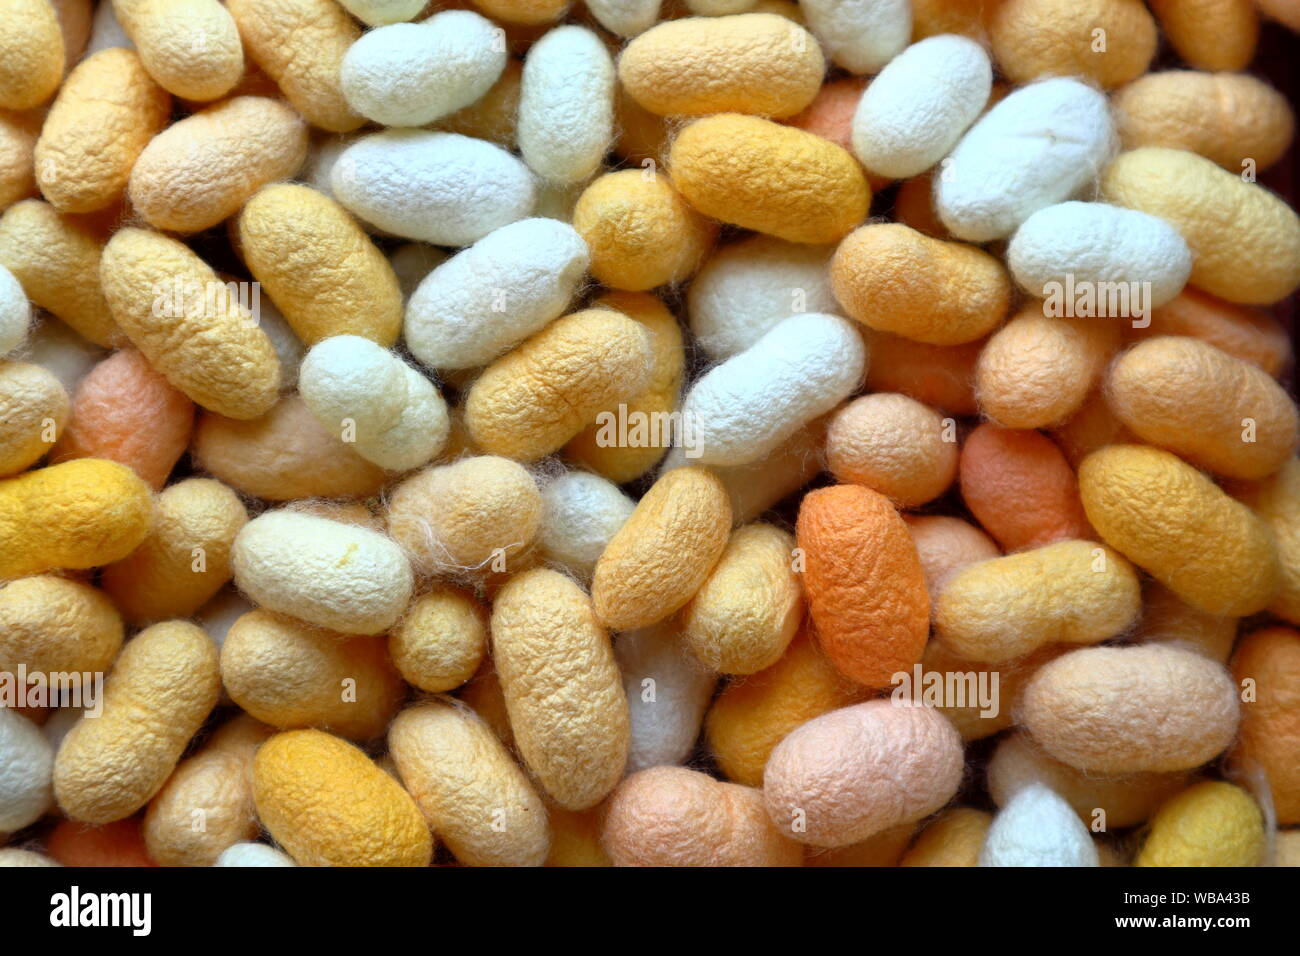 Many silk cocoons ready to reel into silk thread.  They naturally grow in different shades of white, yellow, and pink. Stock Photo